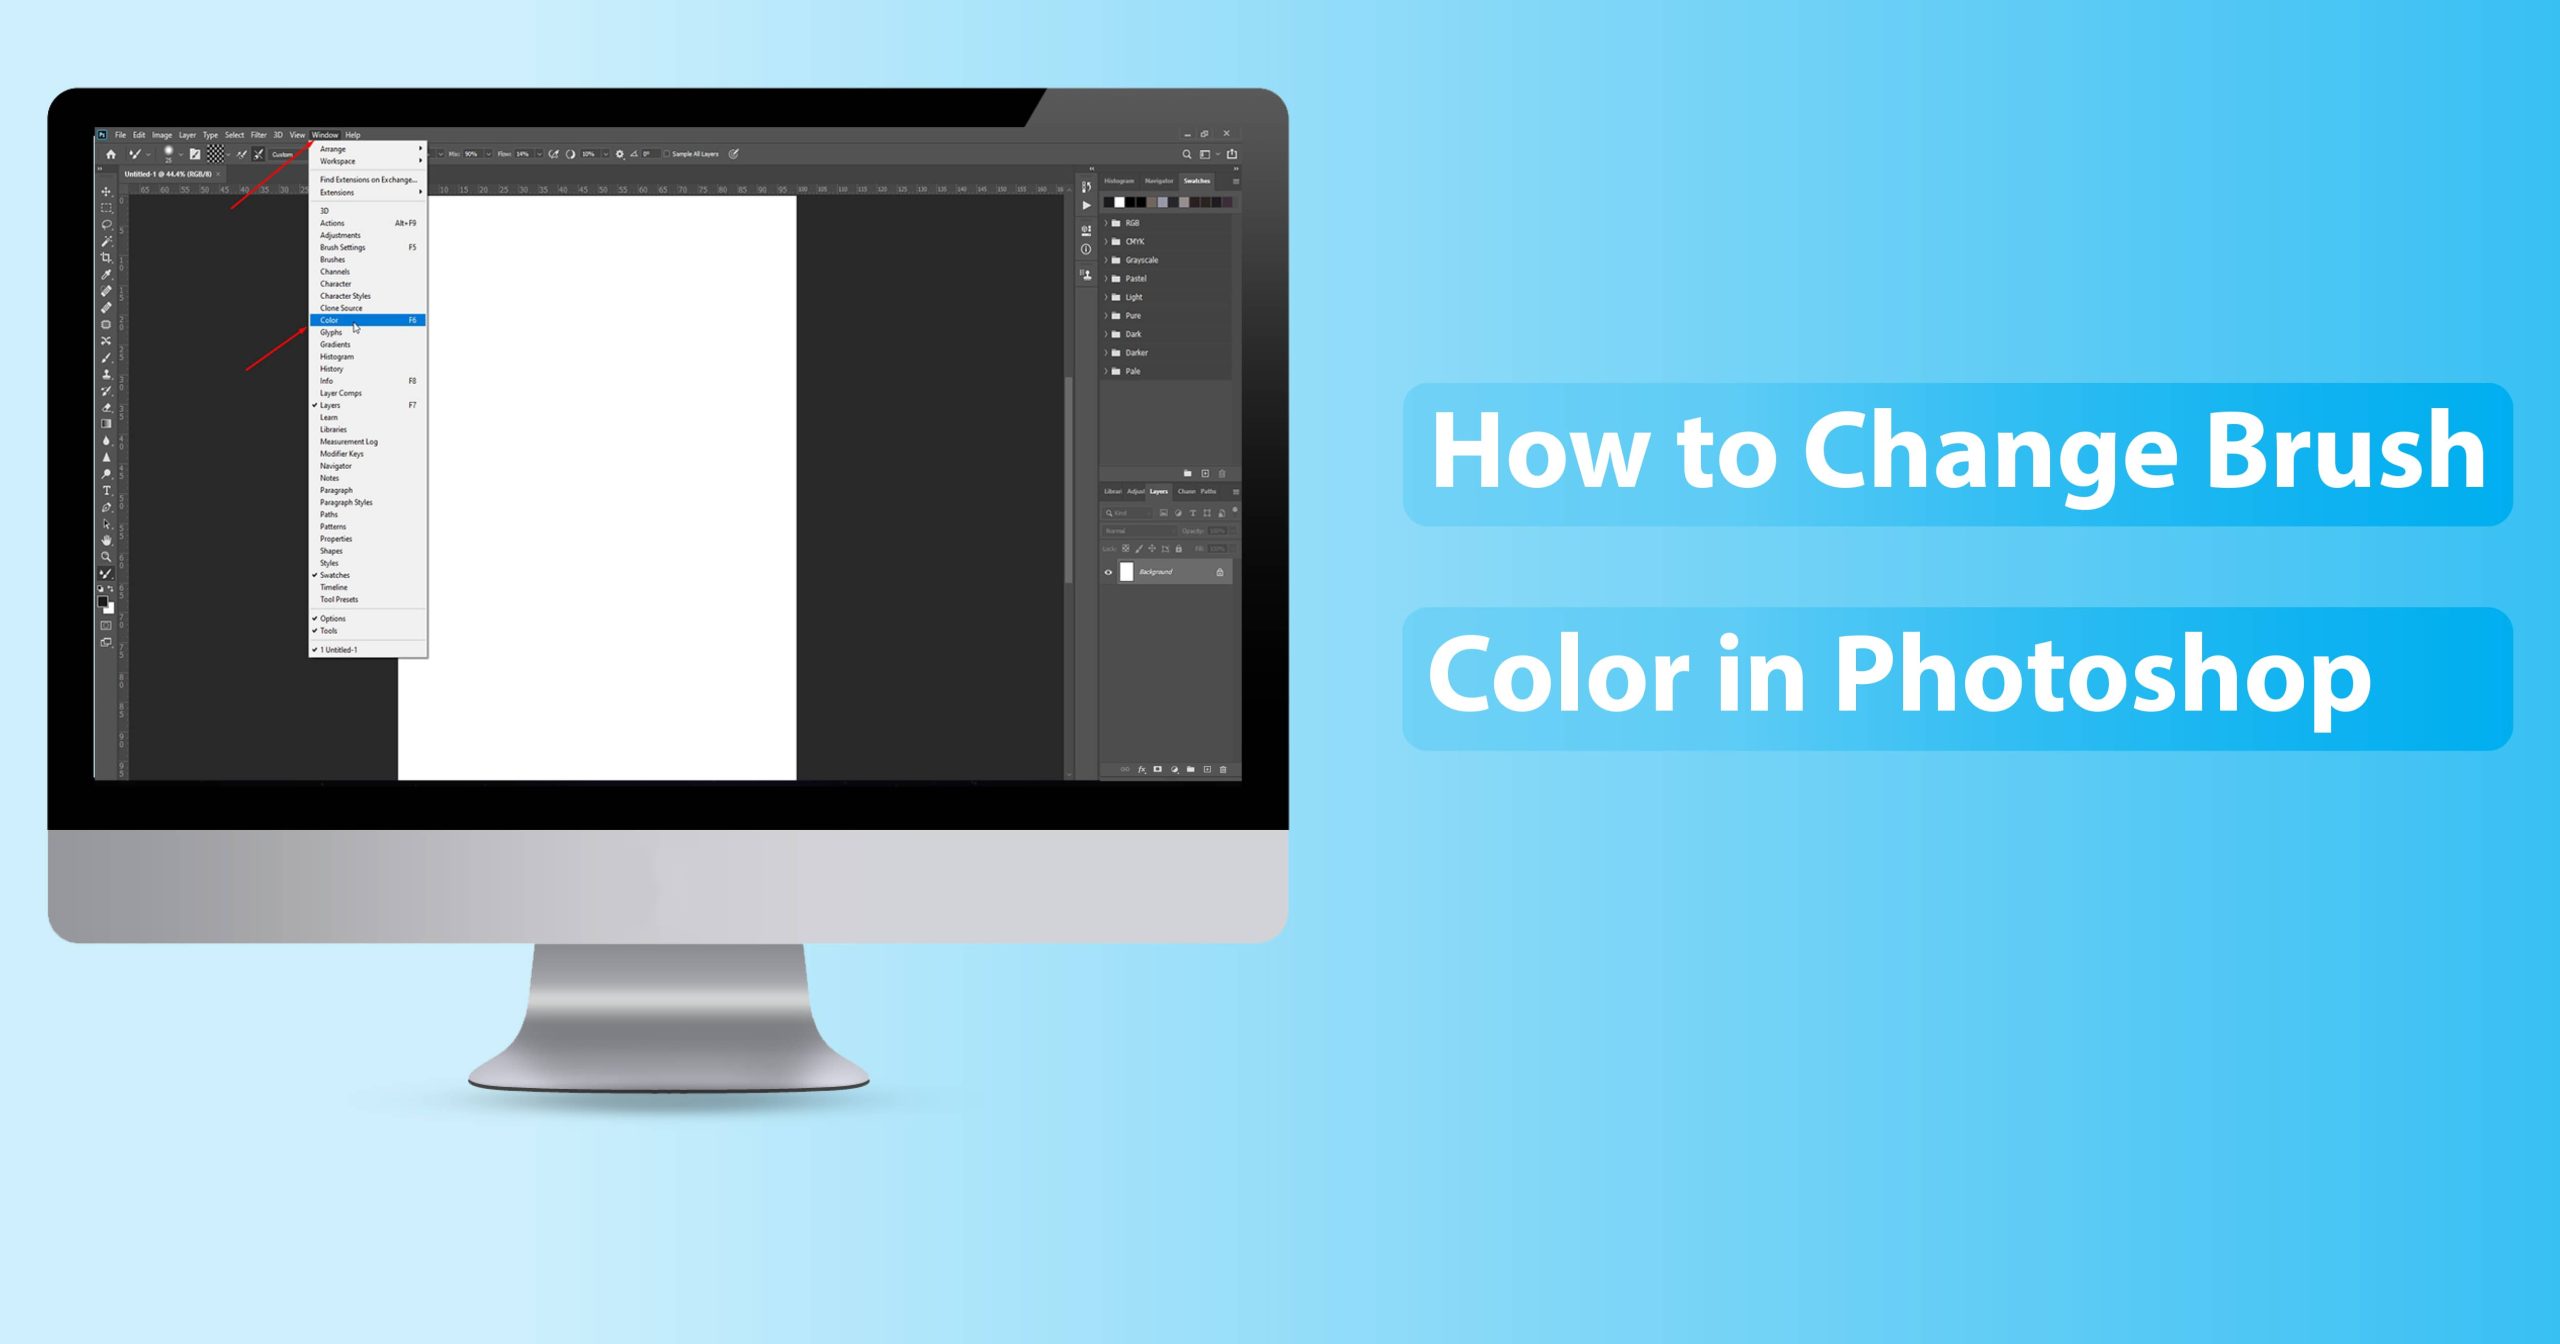 How to Change Brush Color in Photoshop